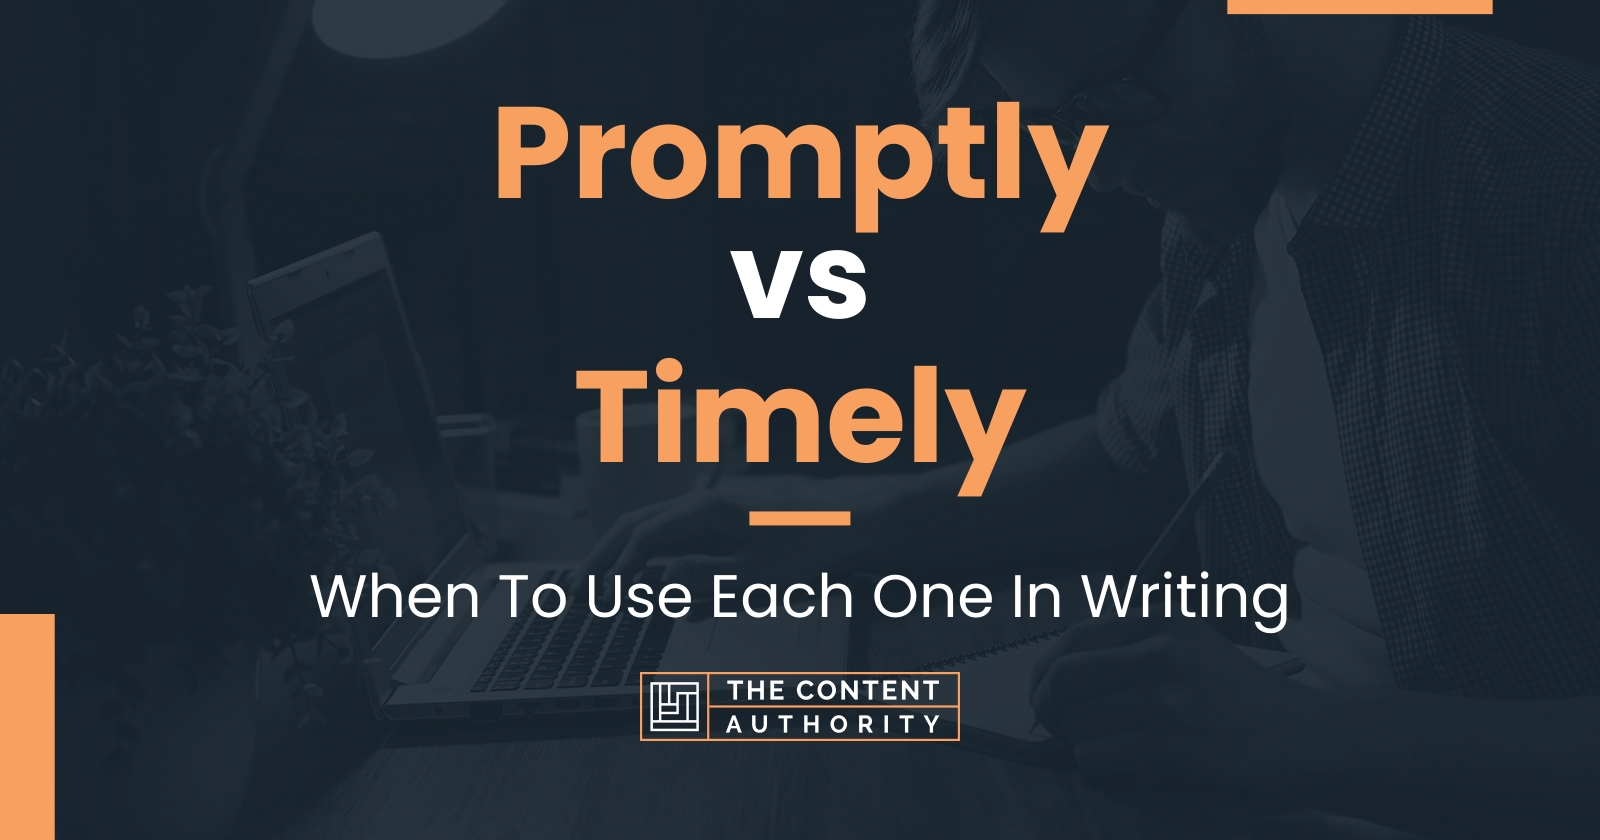 Promptly vs Timely: When To Use Each One In Writing